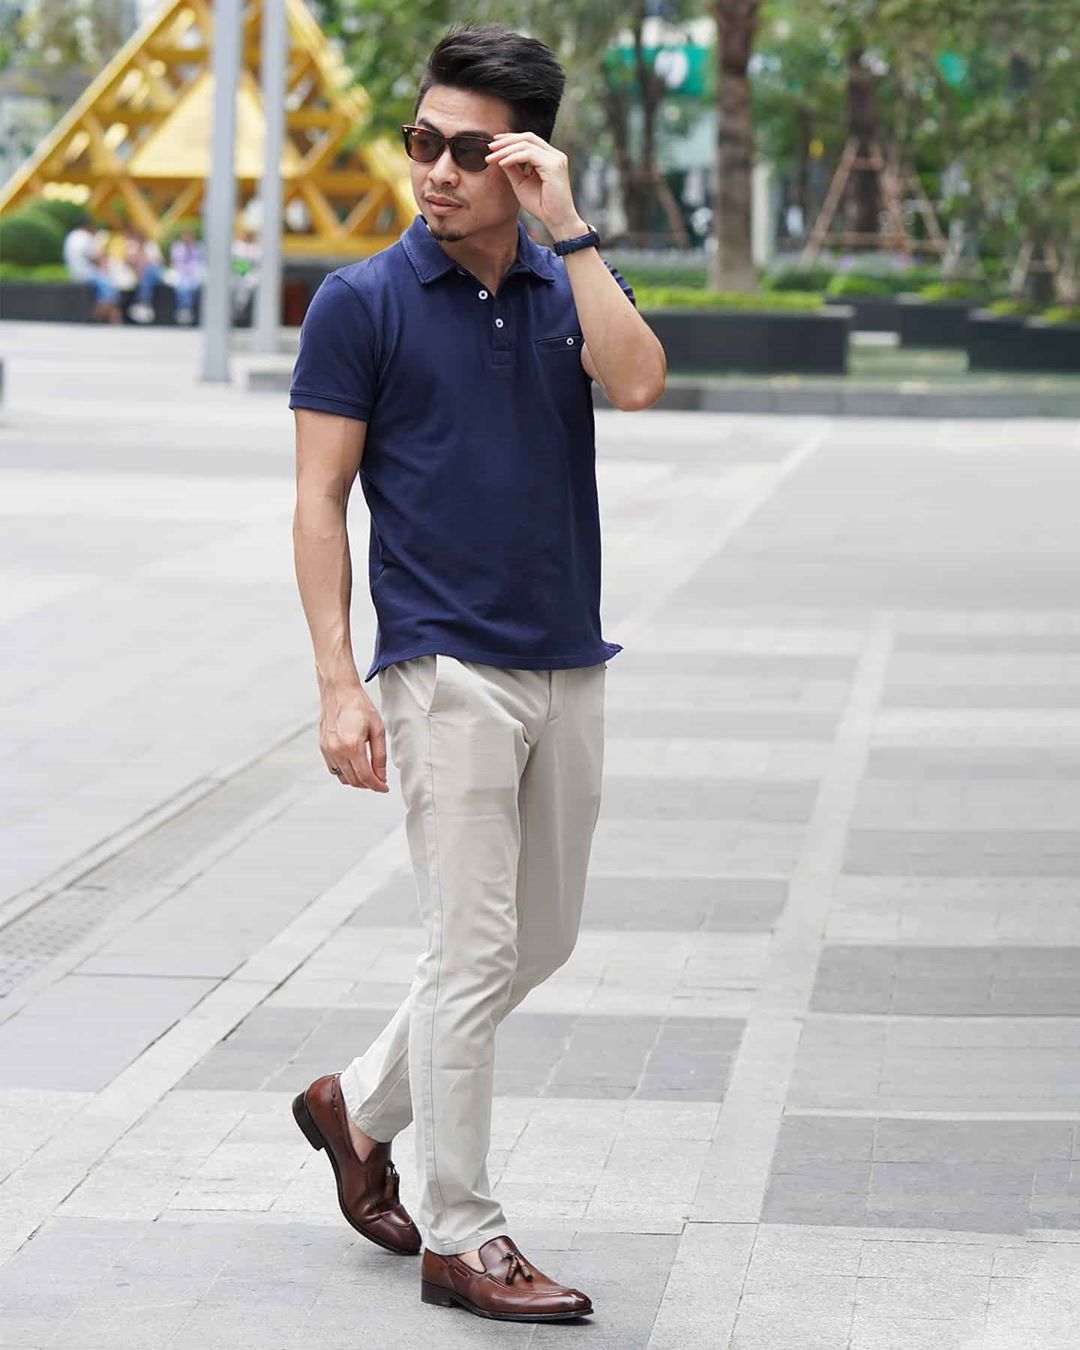 sammensatte Prime jord How to Wear a Polo Shirt: 11 Polo Outfit Ideas For Men